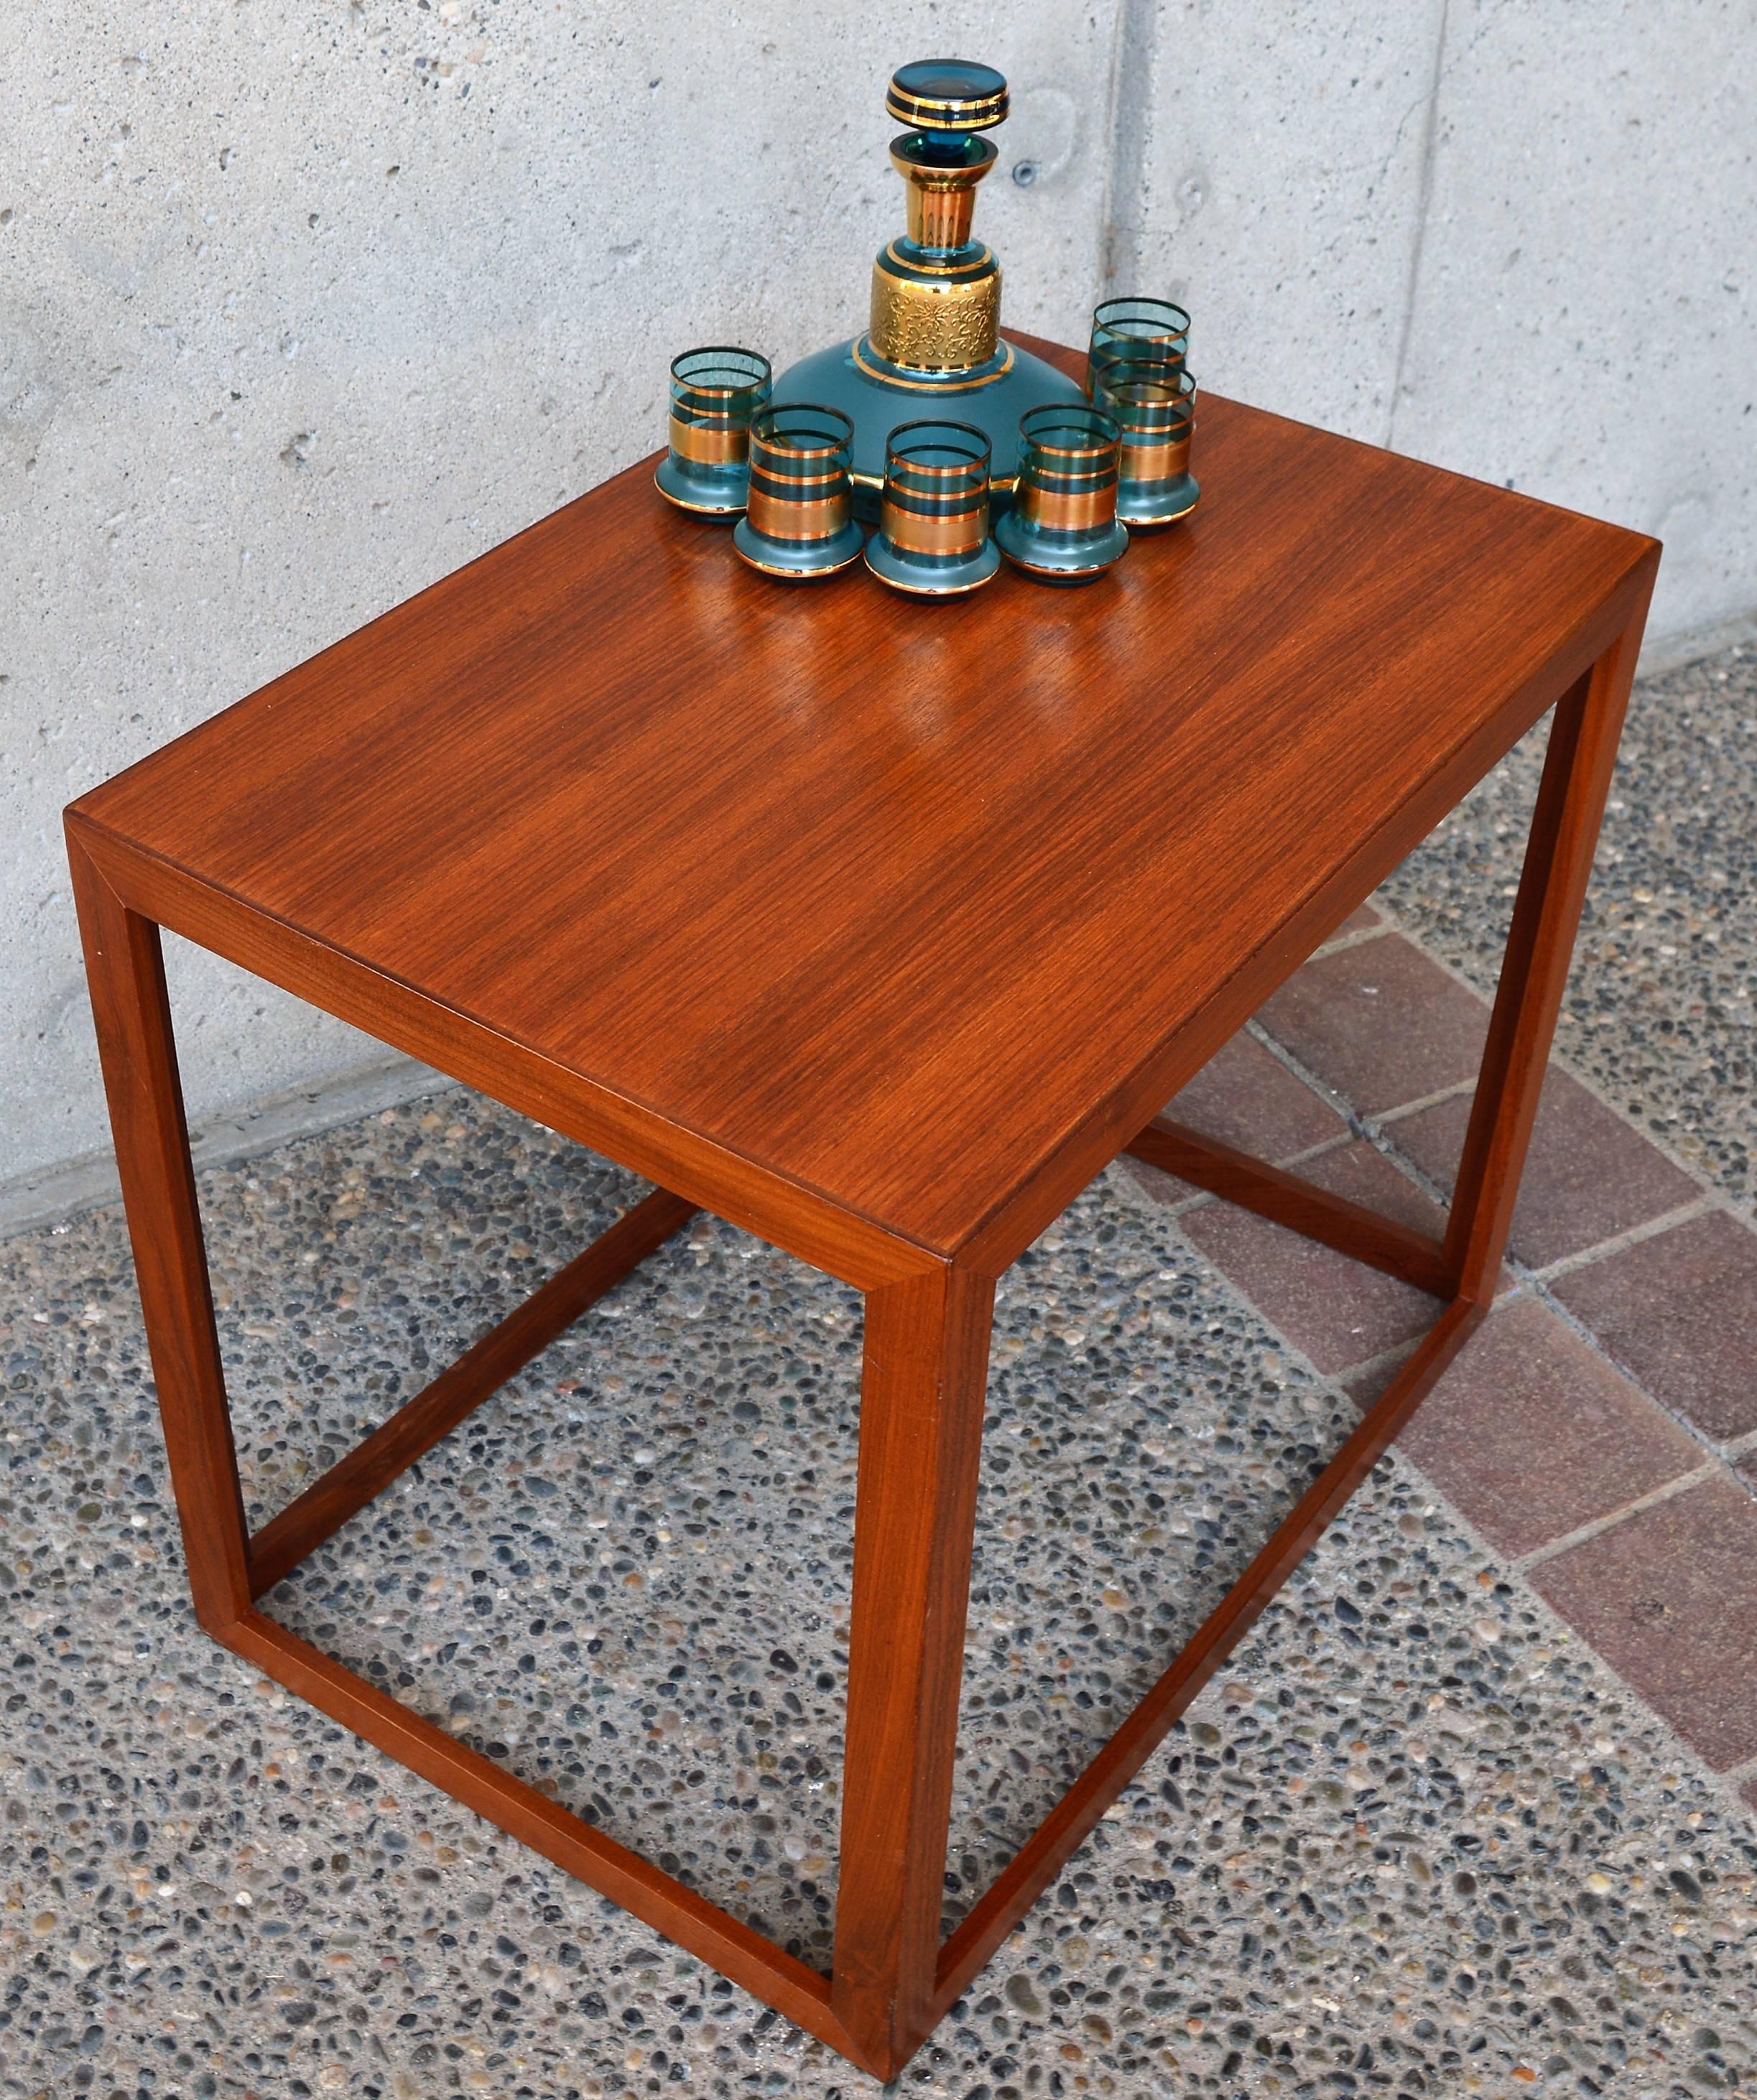 Danish Modern Teak and Mahogany Cube Side Table or Small Coffee Table 1